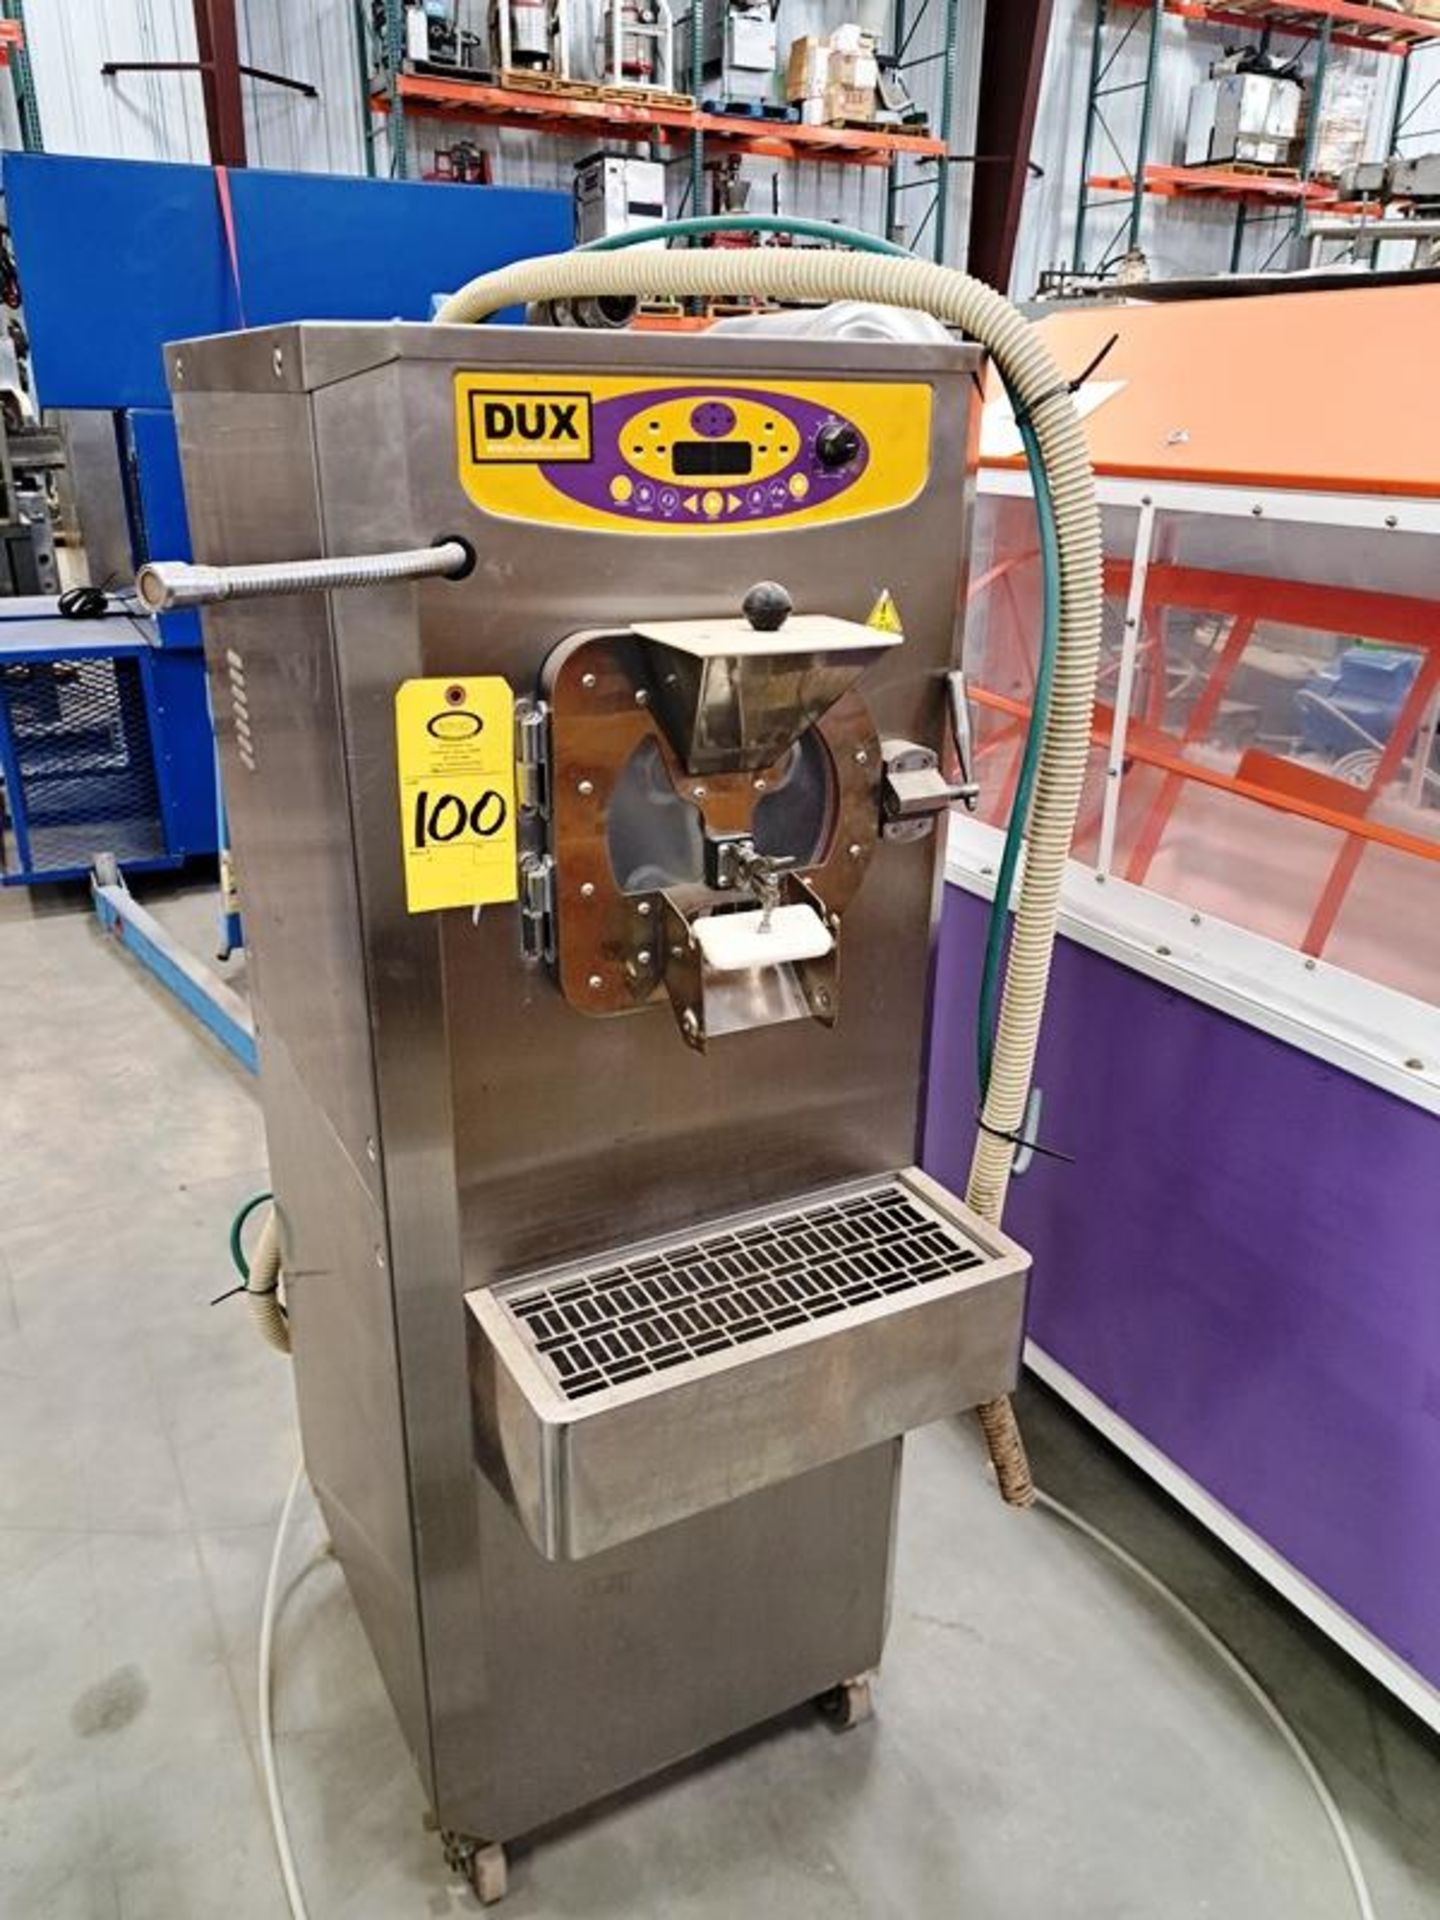 DUX Mdl. DUXV70-DLX Batch Freezer/Dispenser, 220 volts, 3 phase (Required Loading Fee: $25.00) NO